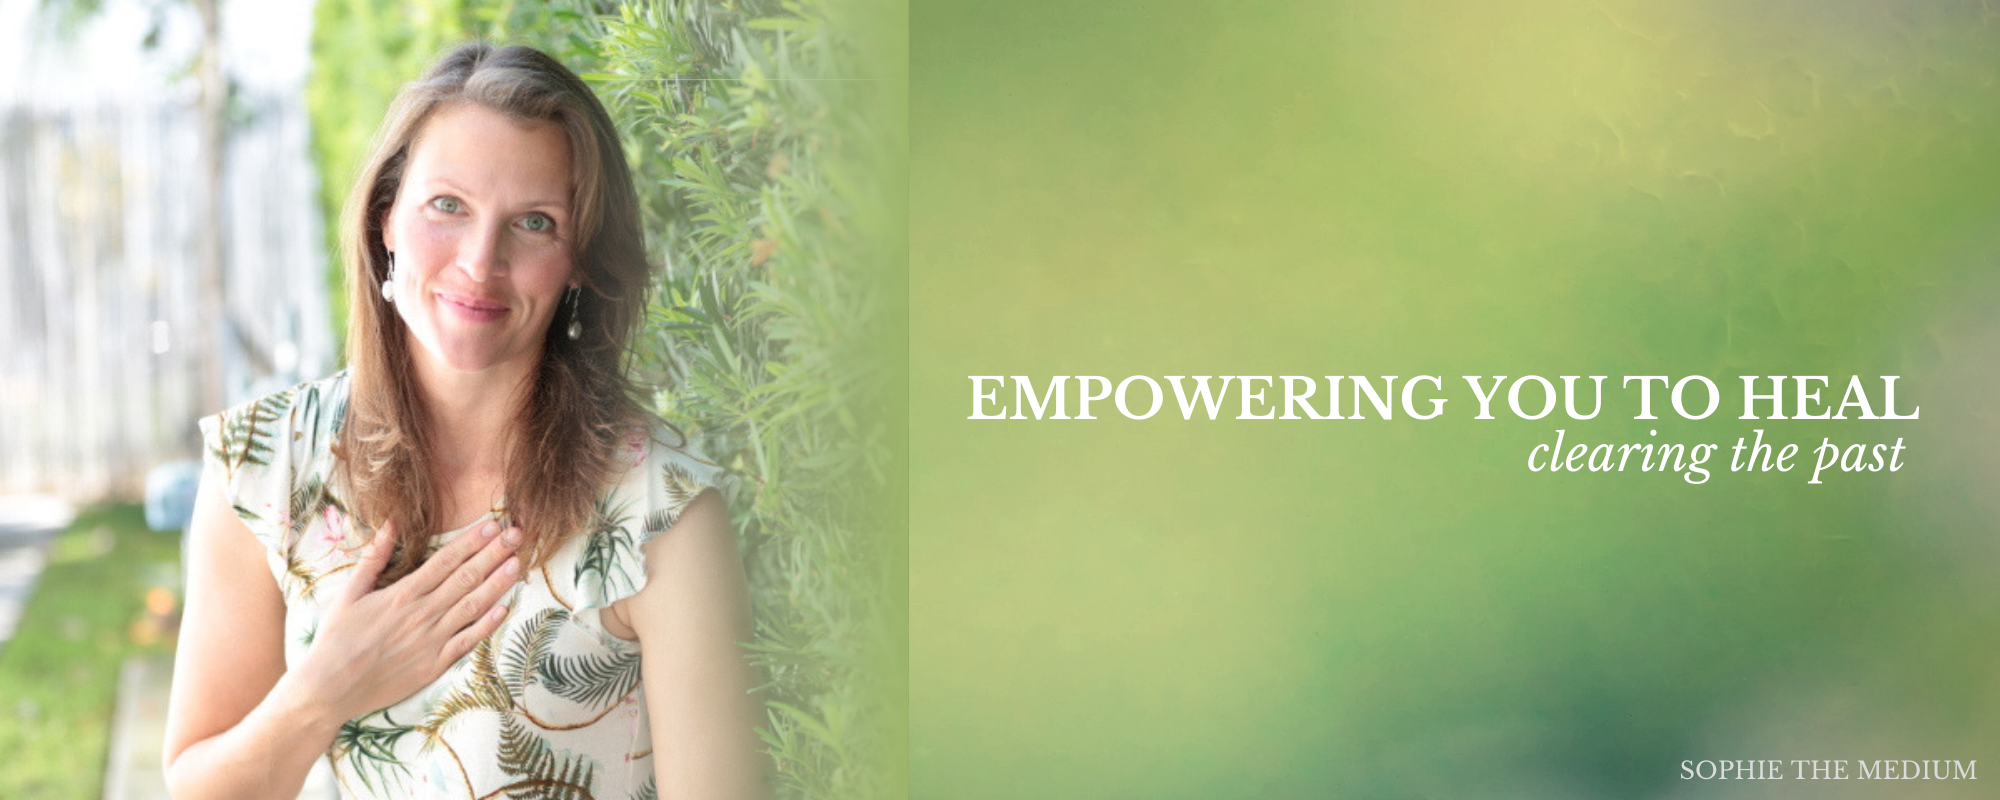 Empowering Your to Heal